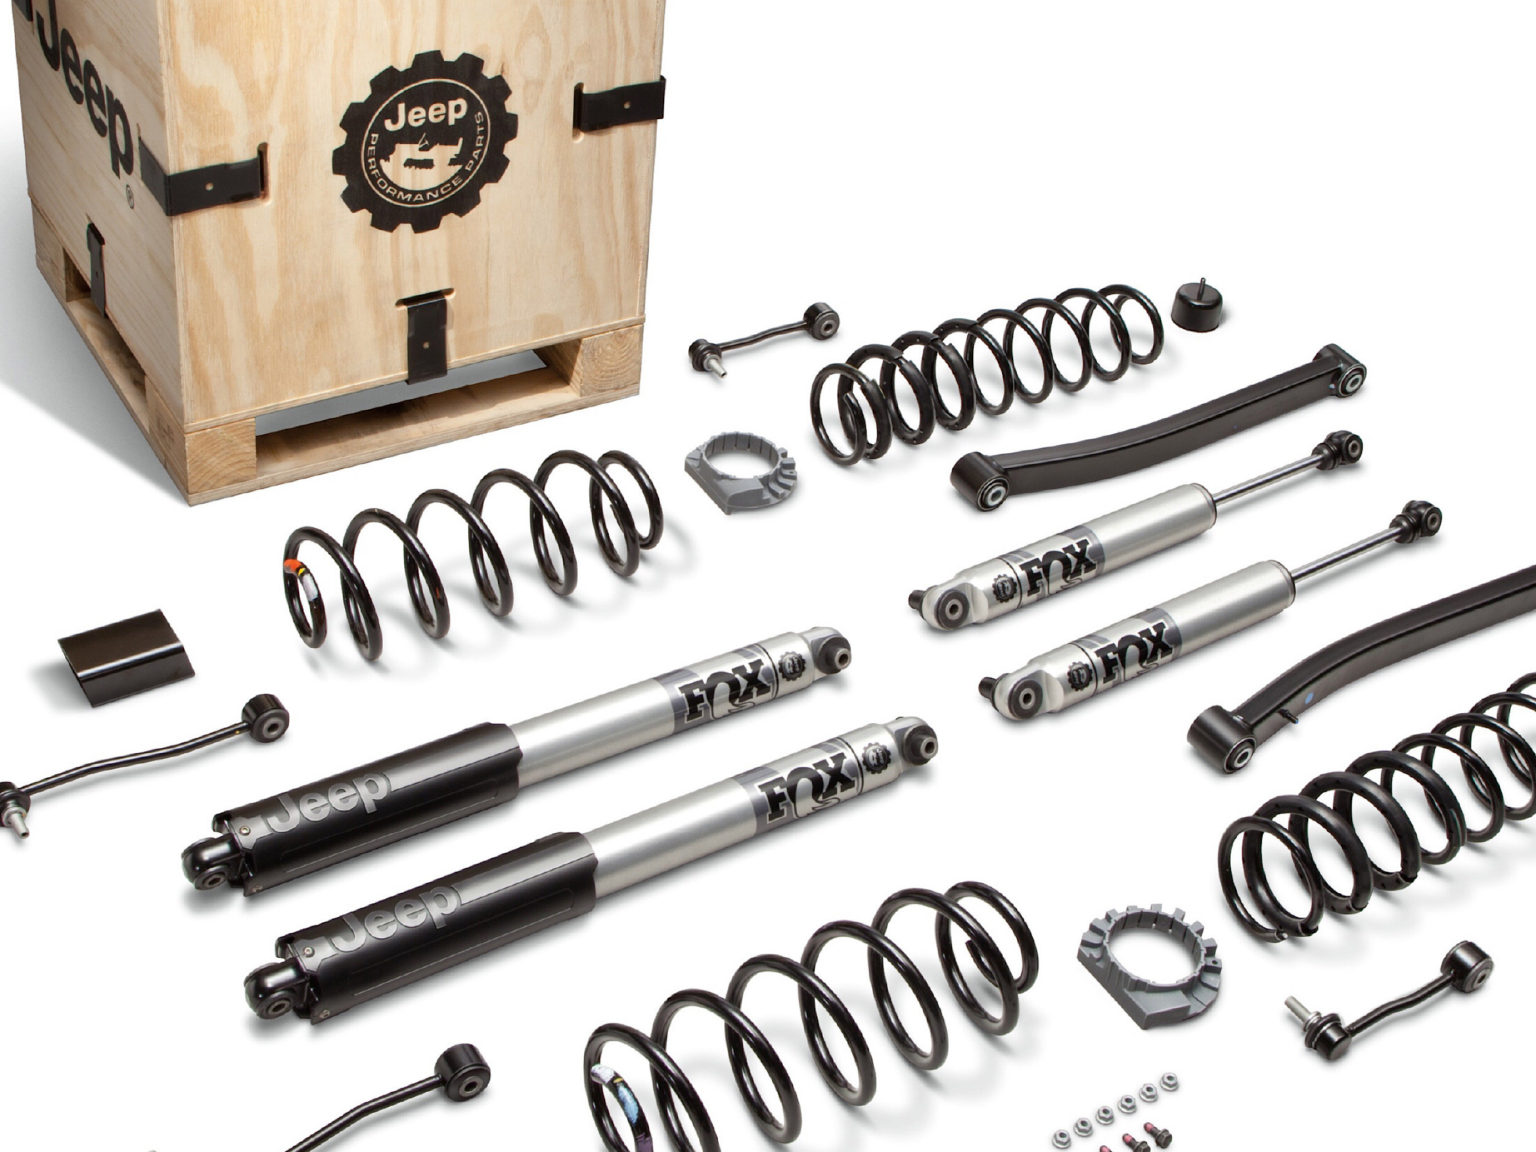 New factory-engineered and quality-tested lift kits for the EcoDiesel-powered Jeep Wrangler and Jeep Gladiator, offered by Mopar and Jeep Performance Parts